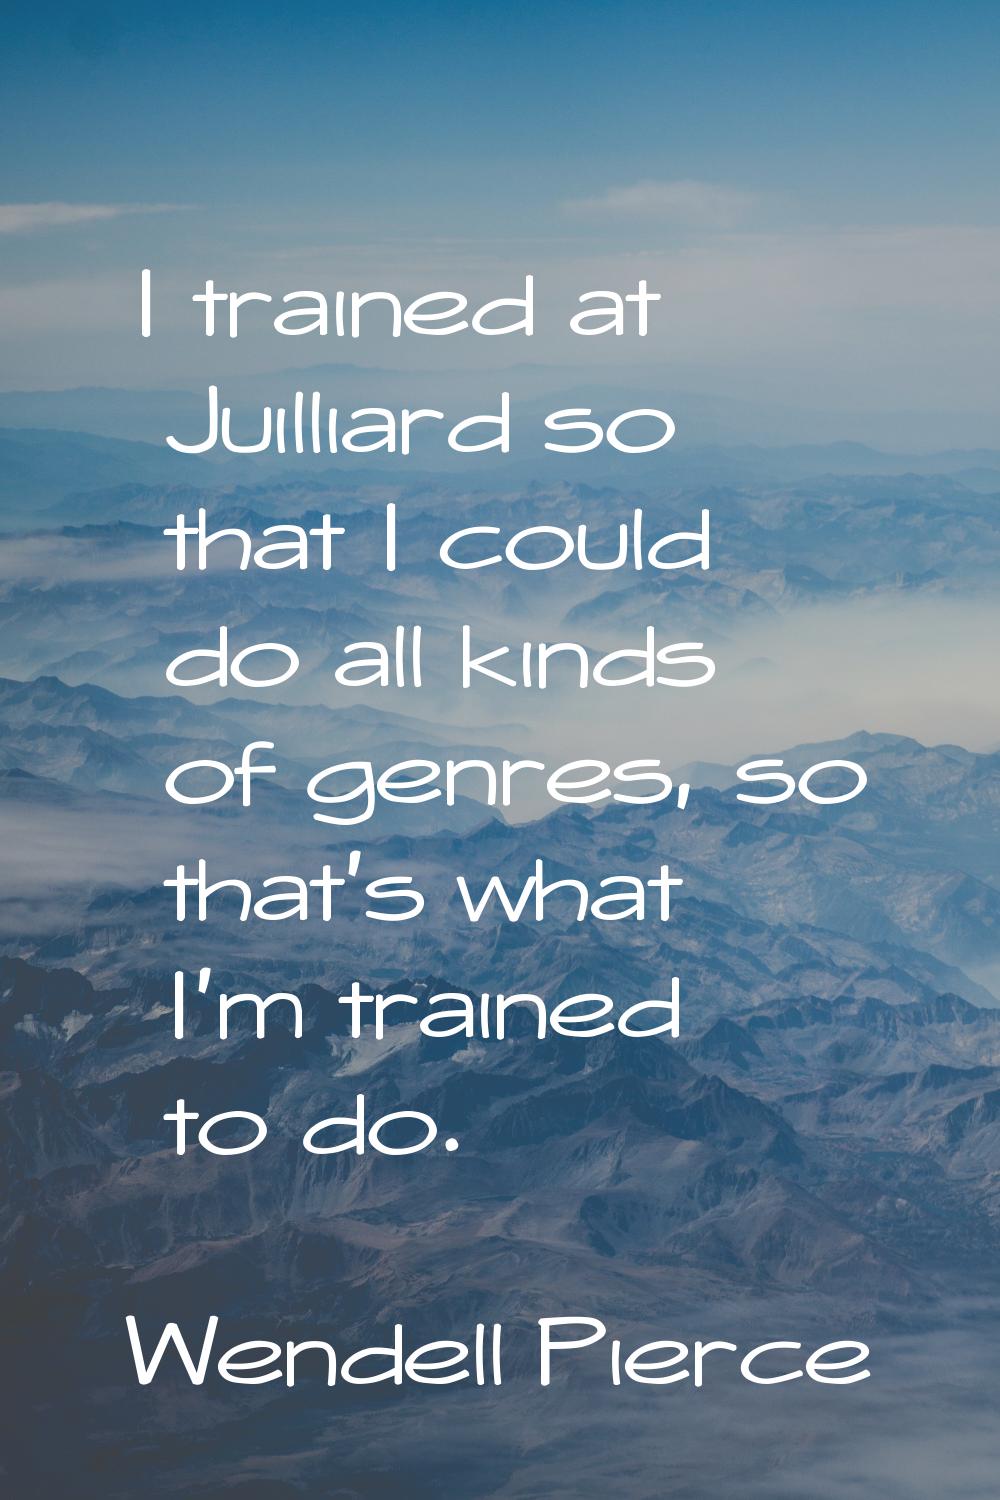 I trained at Juilliard so that I could do all kinds of genres, so that's what I'm trained to do.